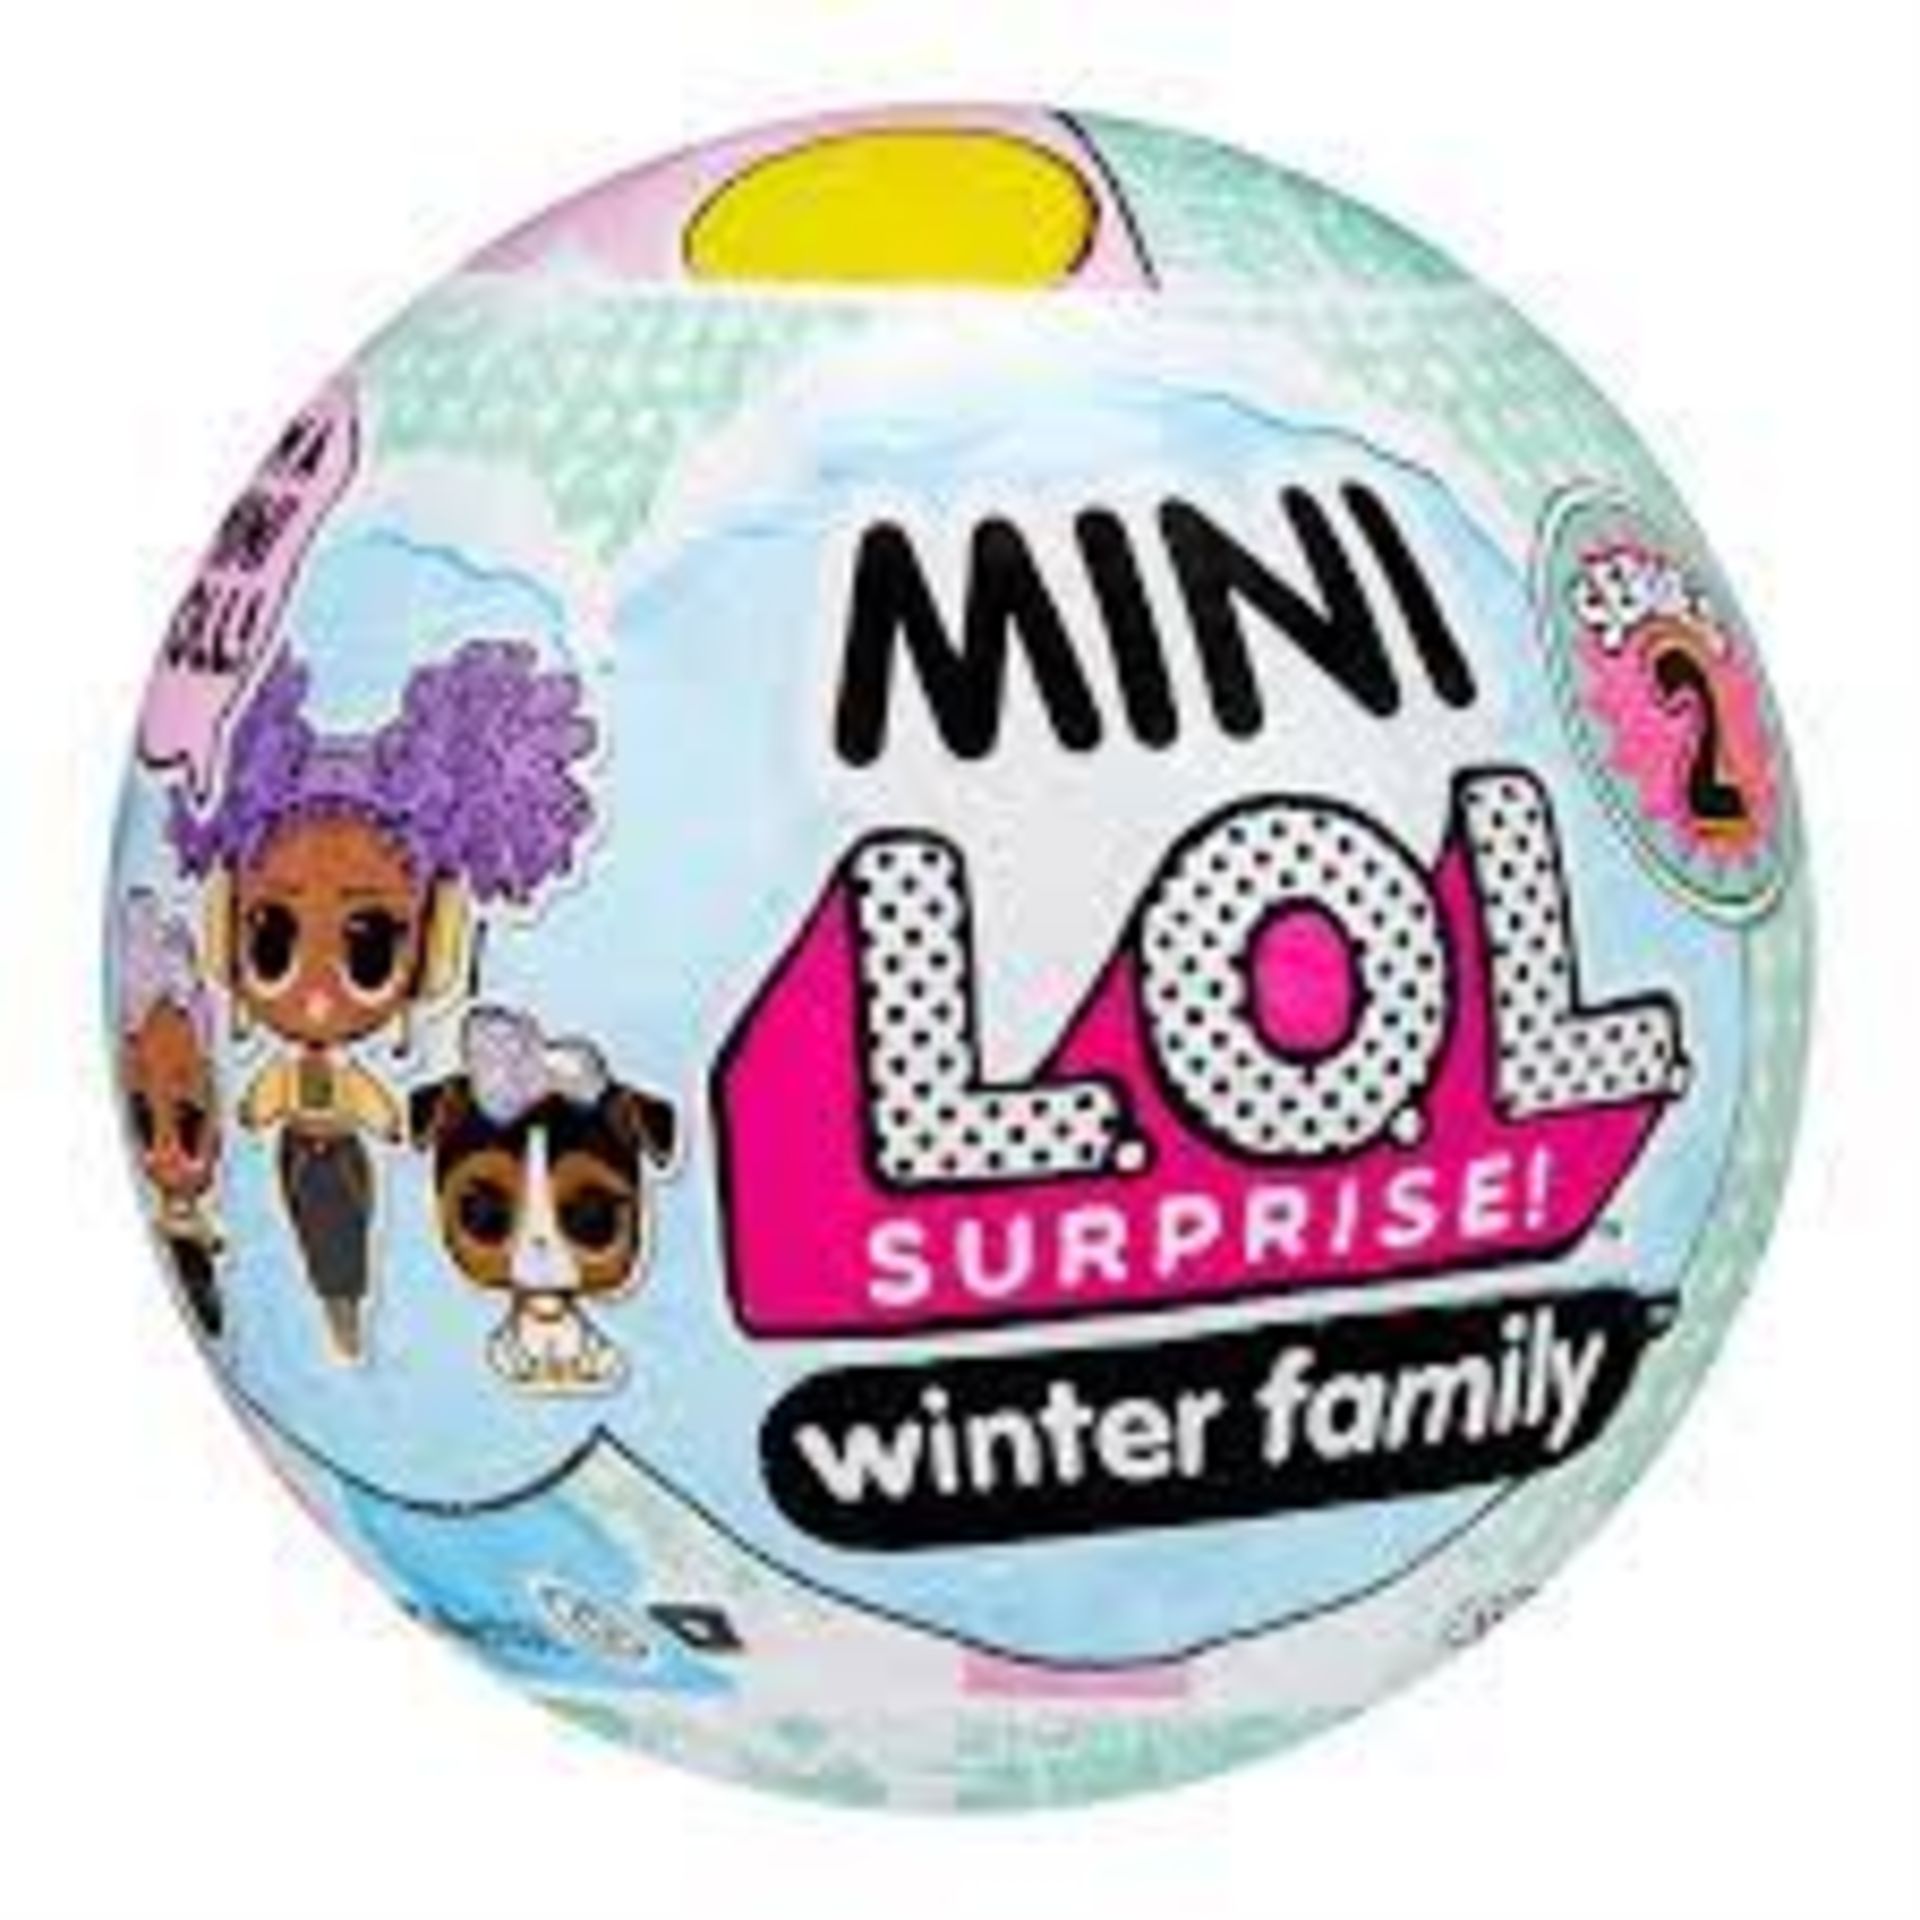 630 X BRAND NEW PIECES OF BRANDED TOYS INCLUDING LOL SURPRISE DOLL SERIES, DESIGN A FRIEND SLEEPOVER